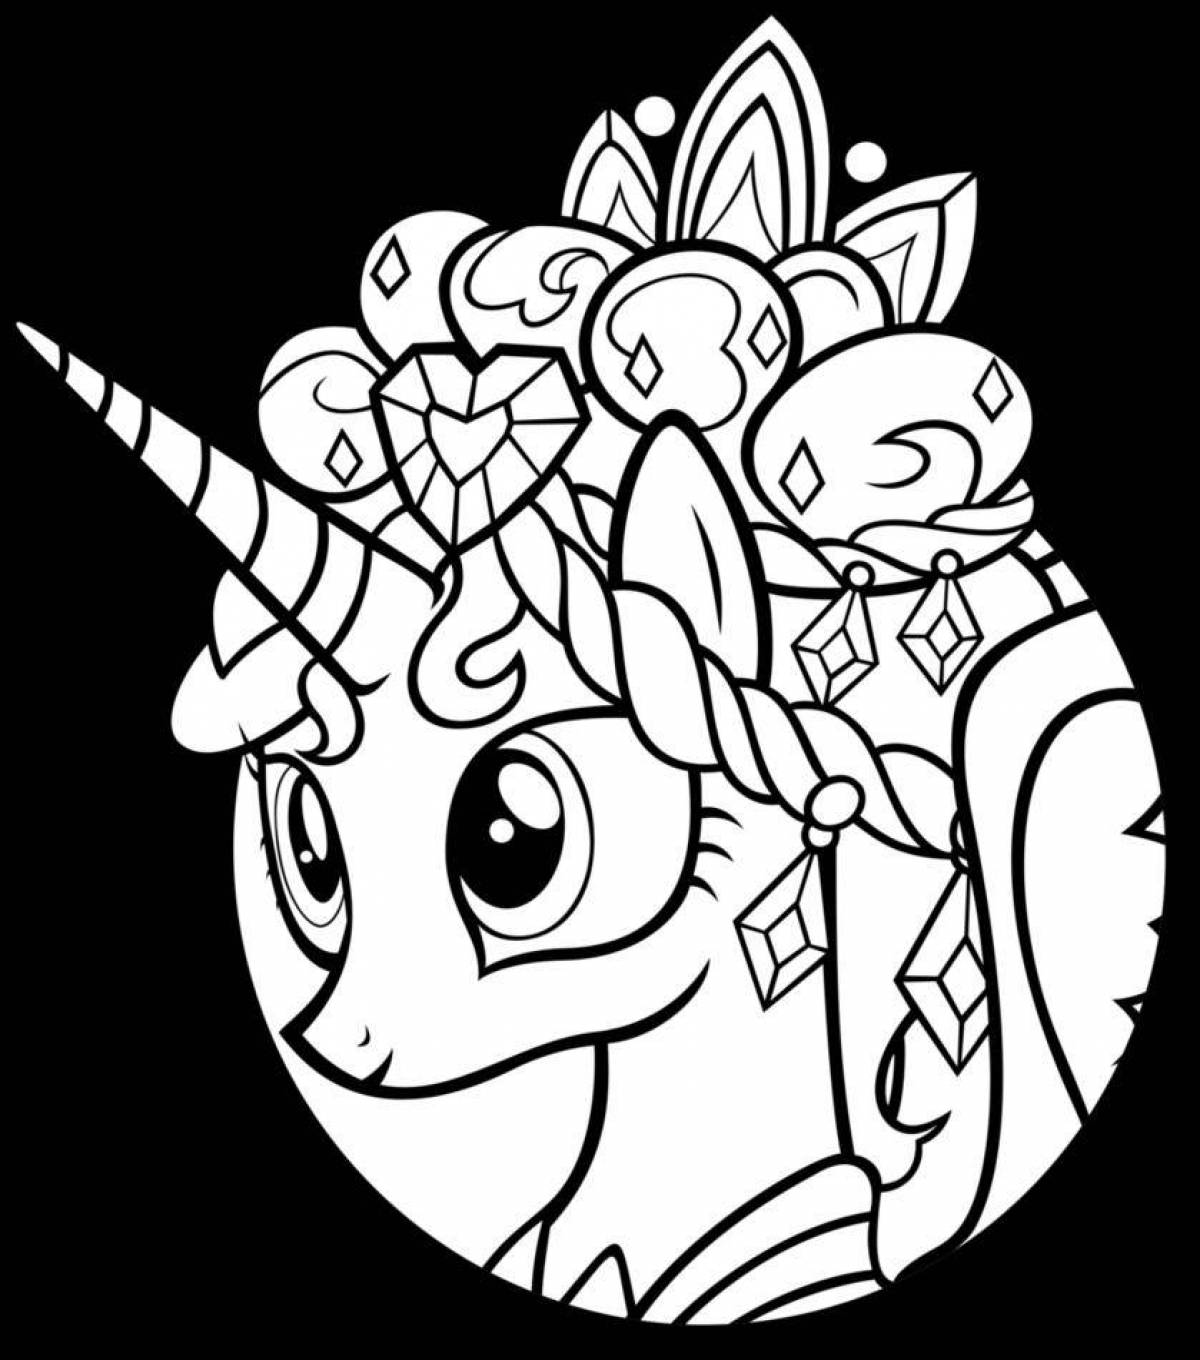 Adorable pony cadence coloring page